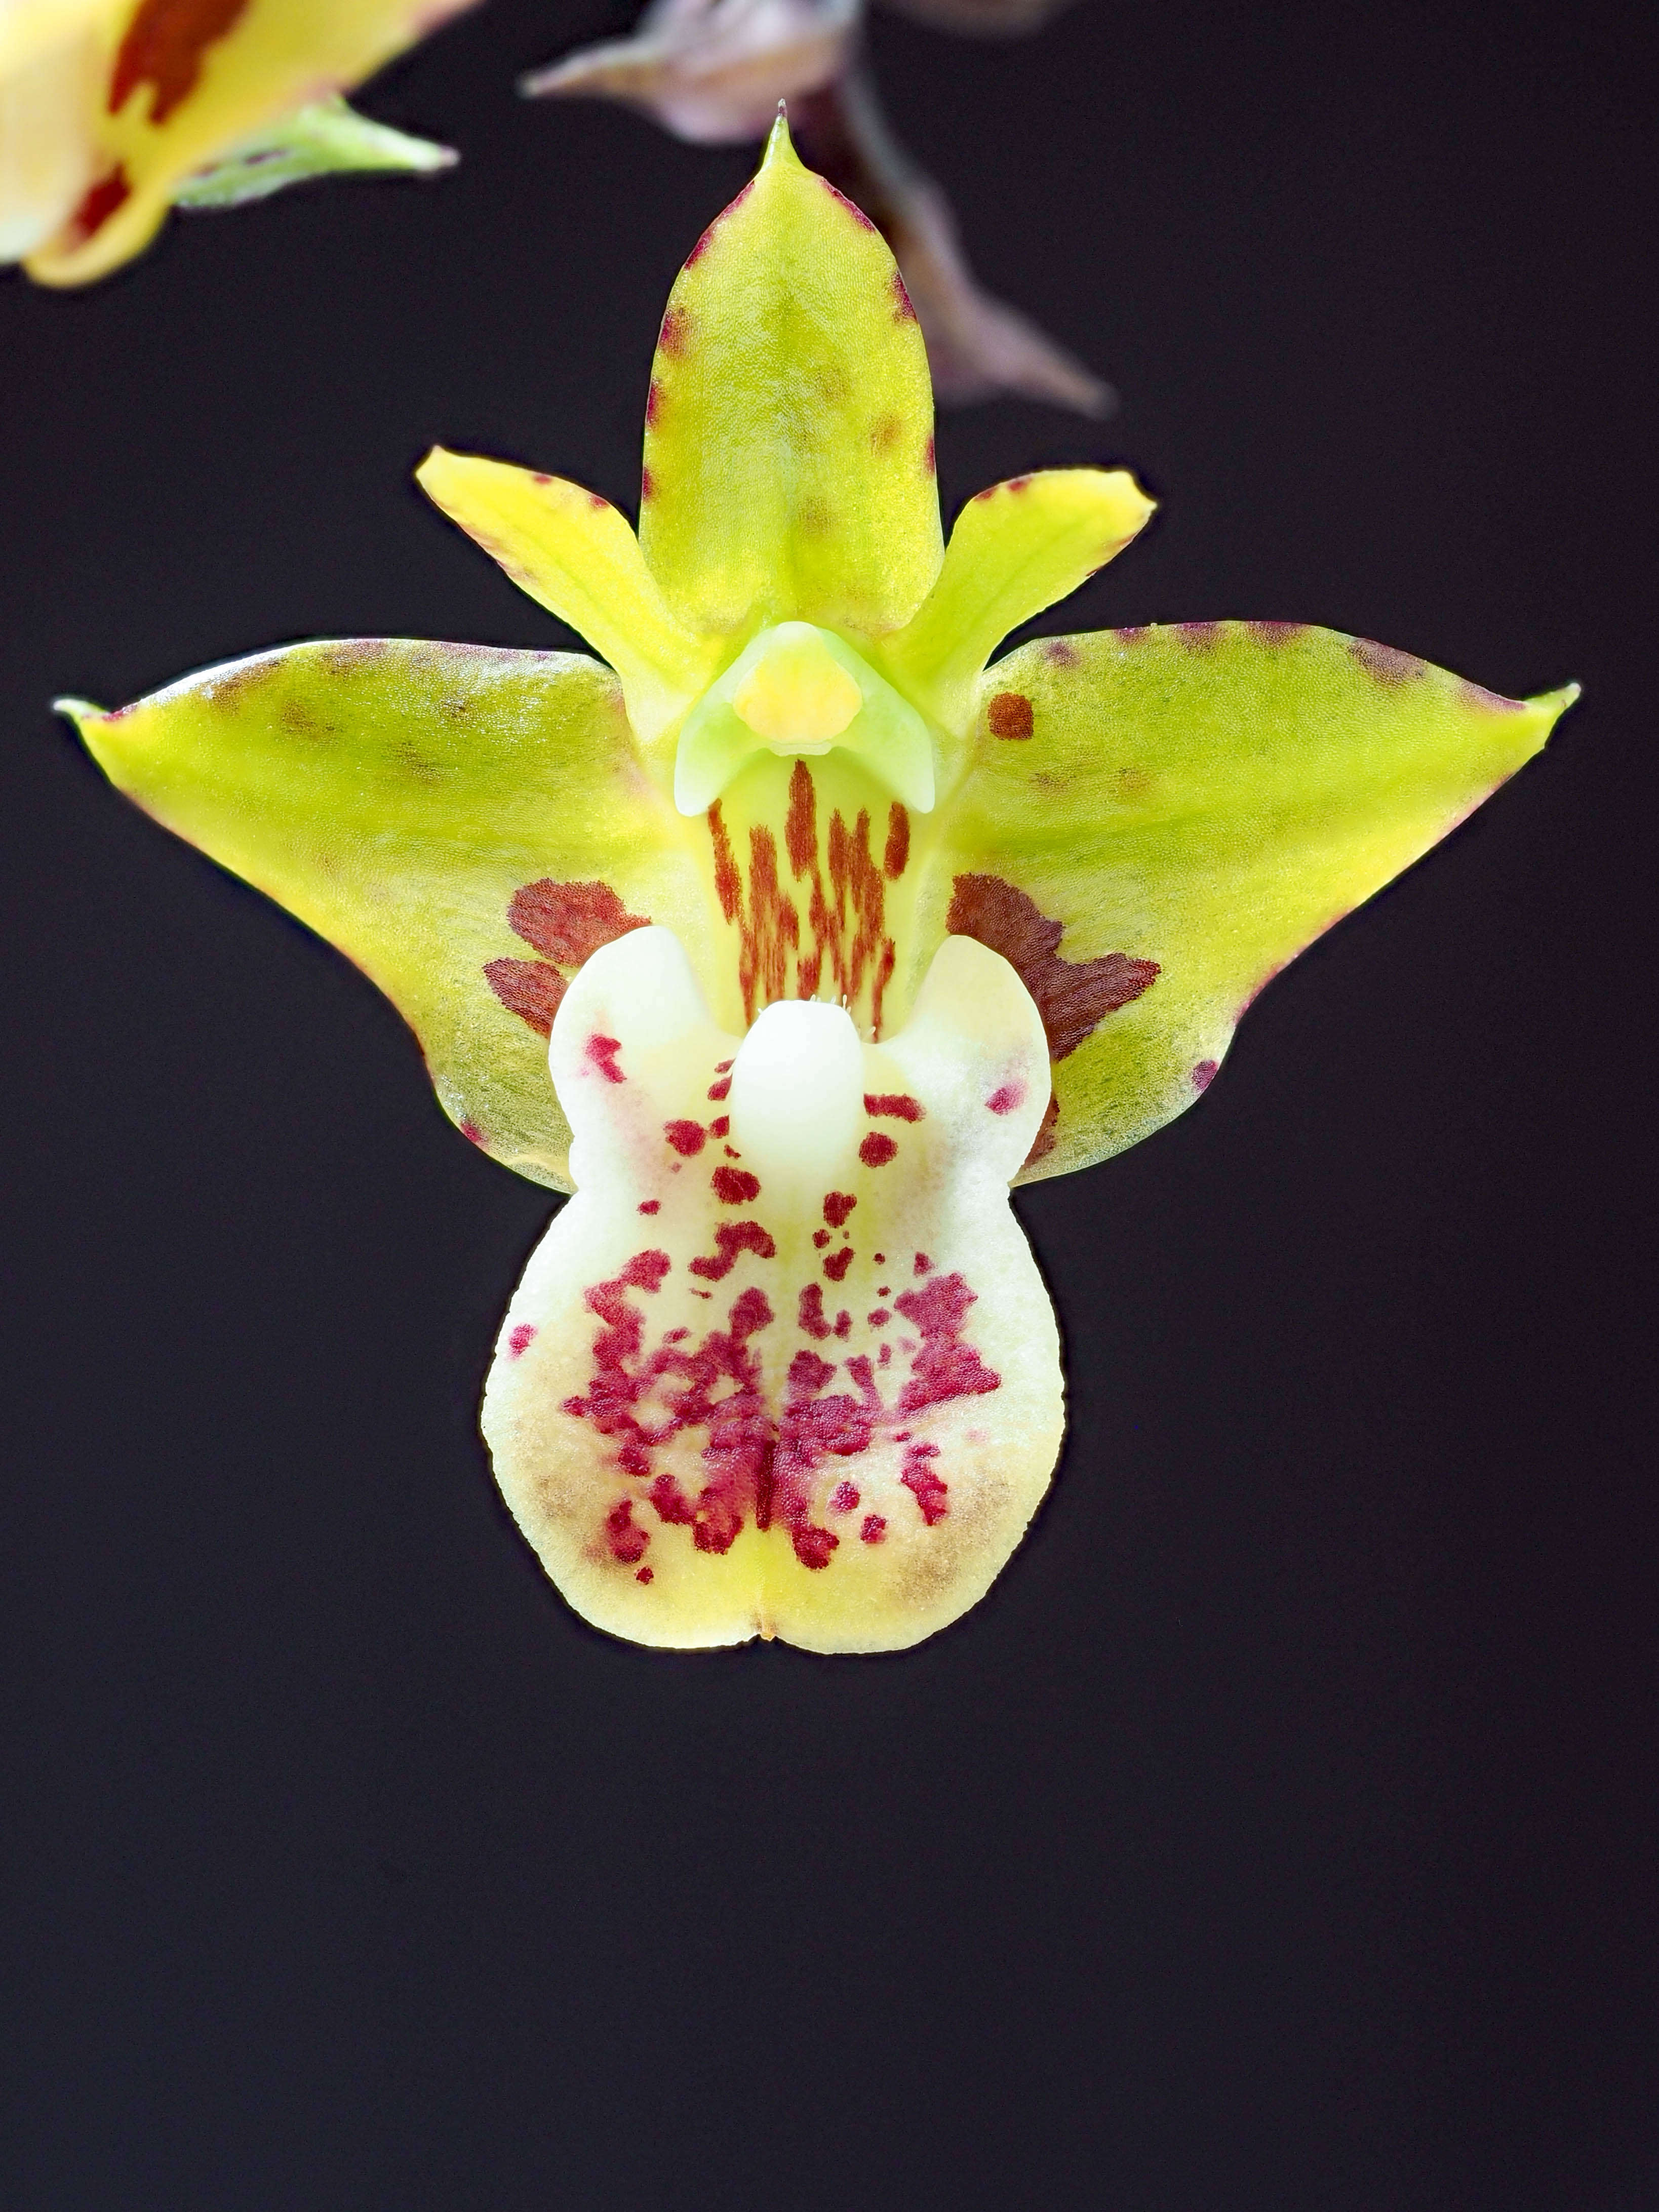 Image of Yellowspike orchids